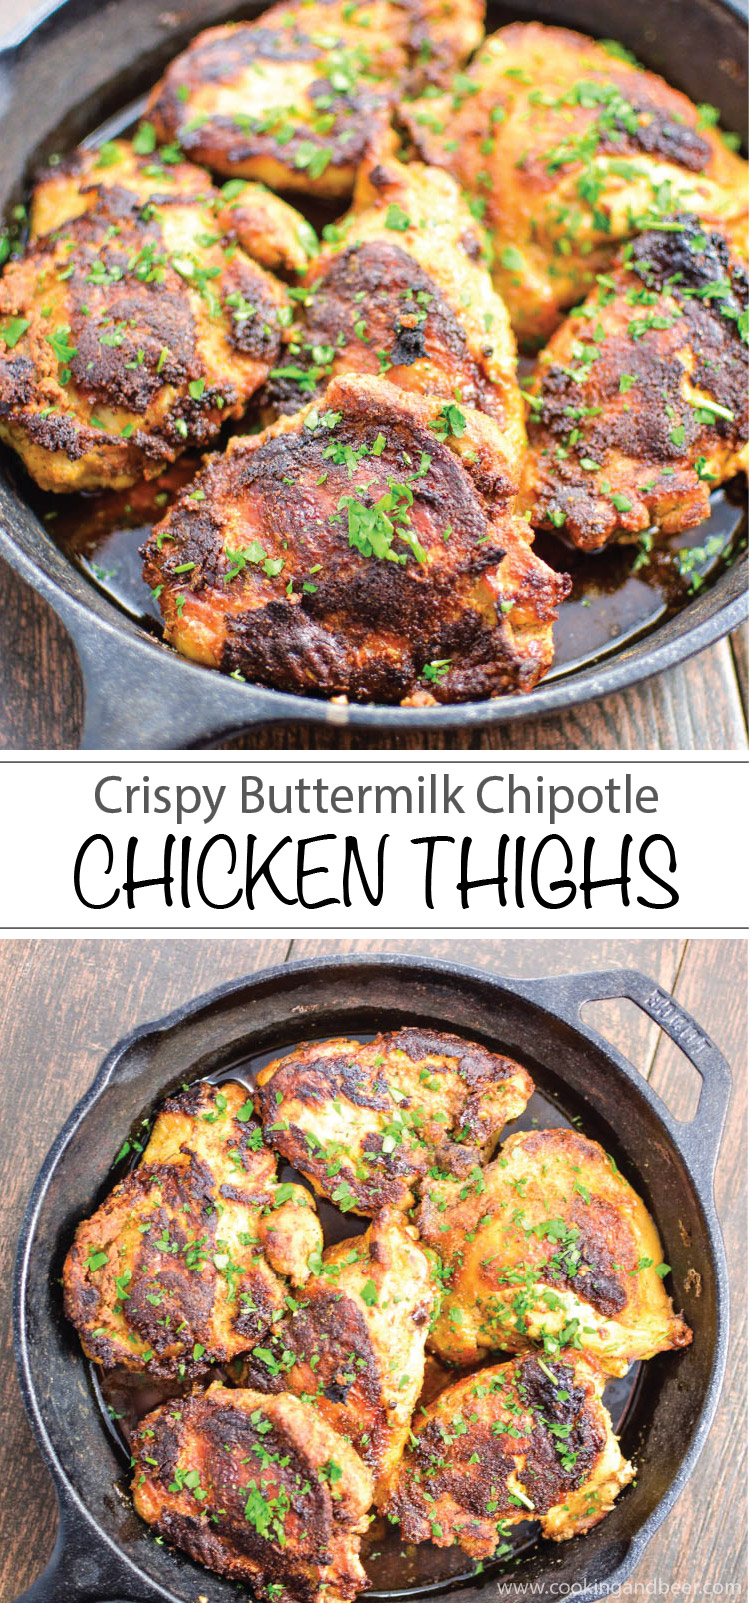 The perfect quick weeknight dinner, these crispy chicken thighs are marinated in buttermilk and tossed in a delicious spice mixture! | www.cookingandbeer.com